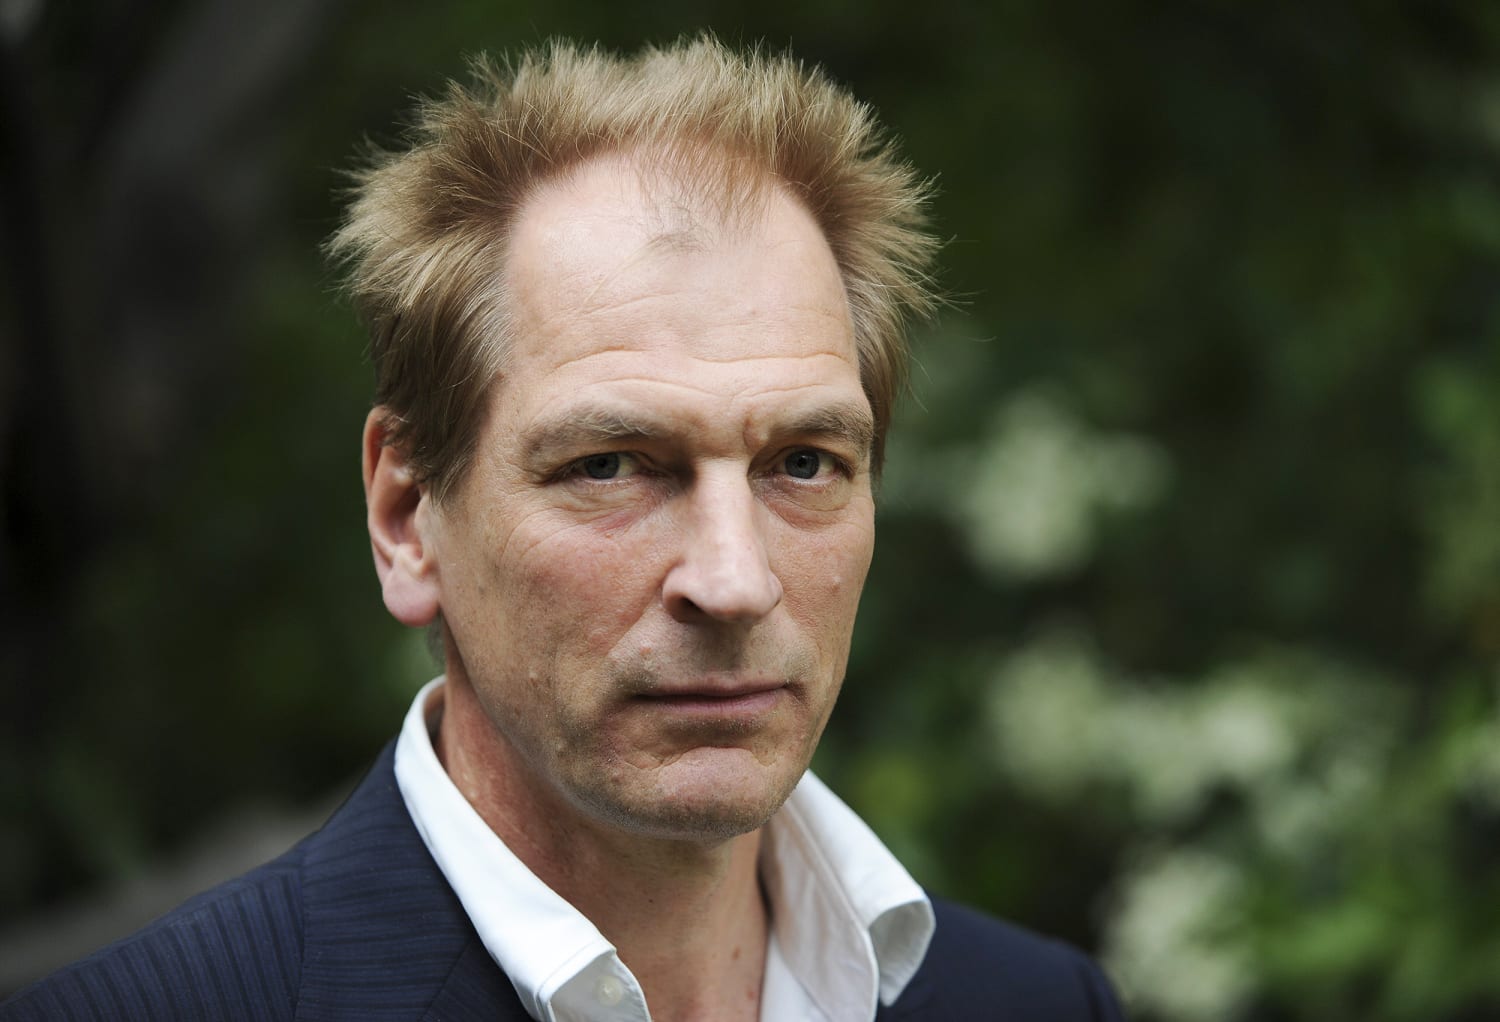 Actor Julian Sands missing for days after going for a hike on California mountain